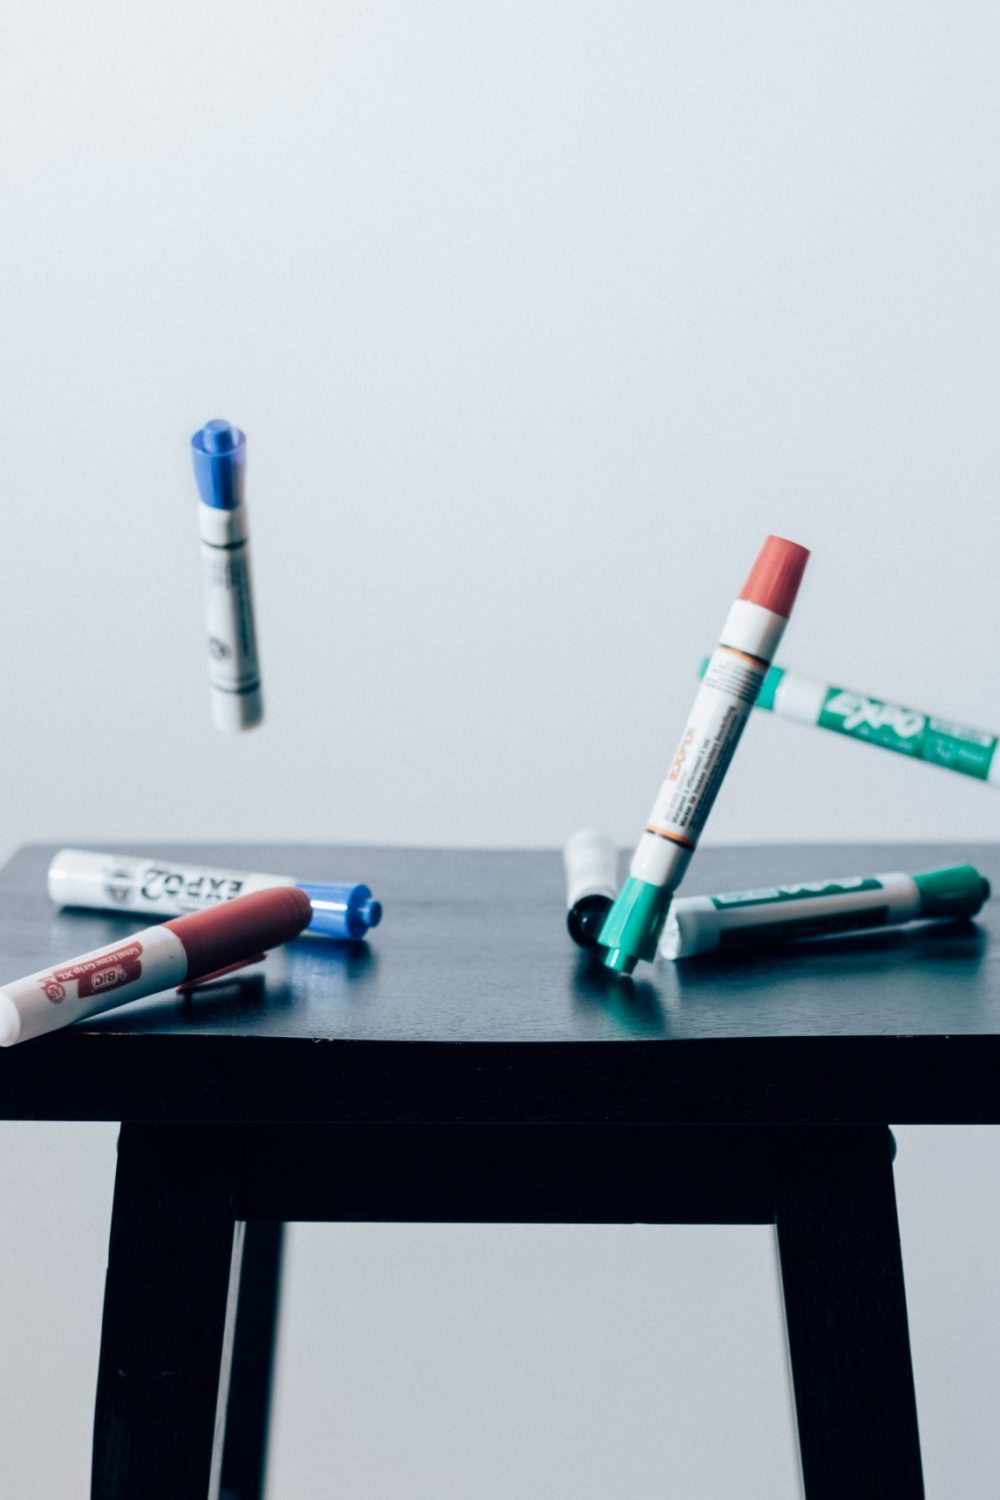 Floating dry erase markers